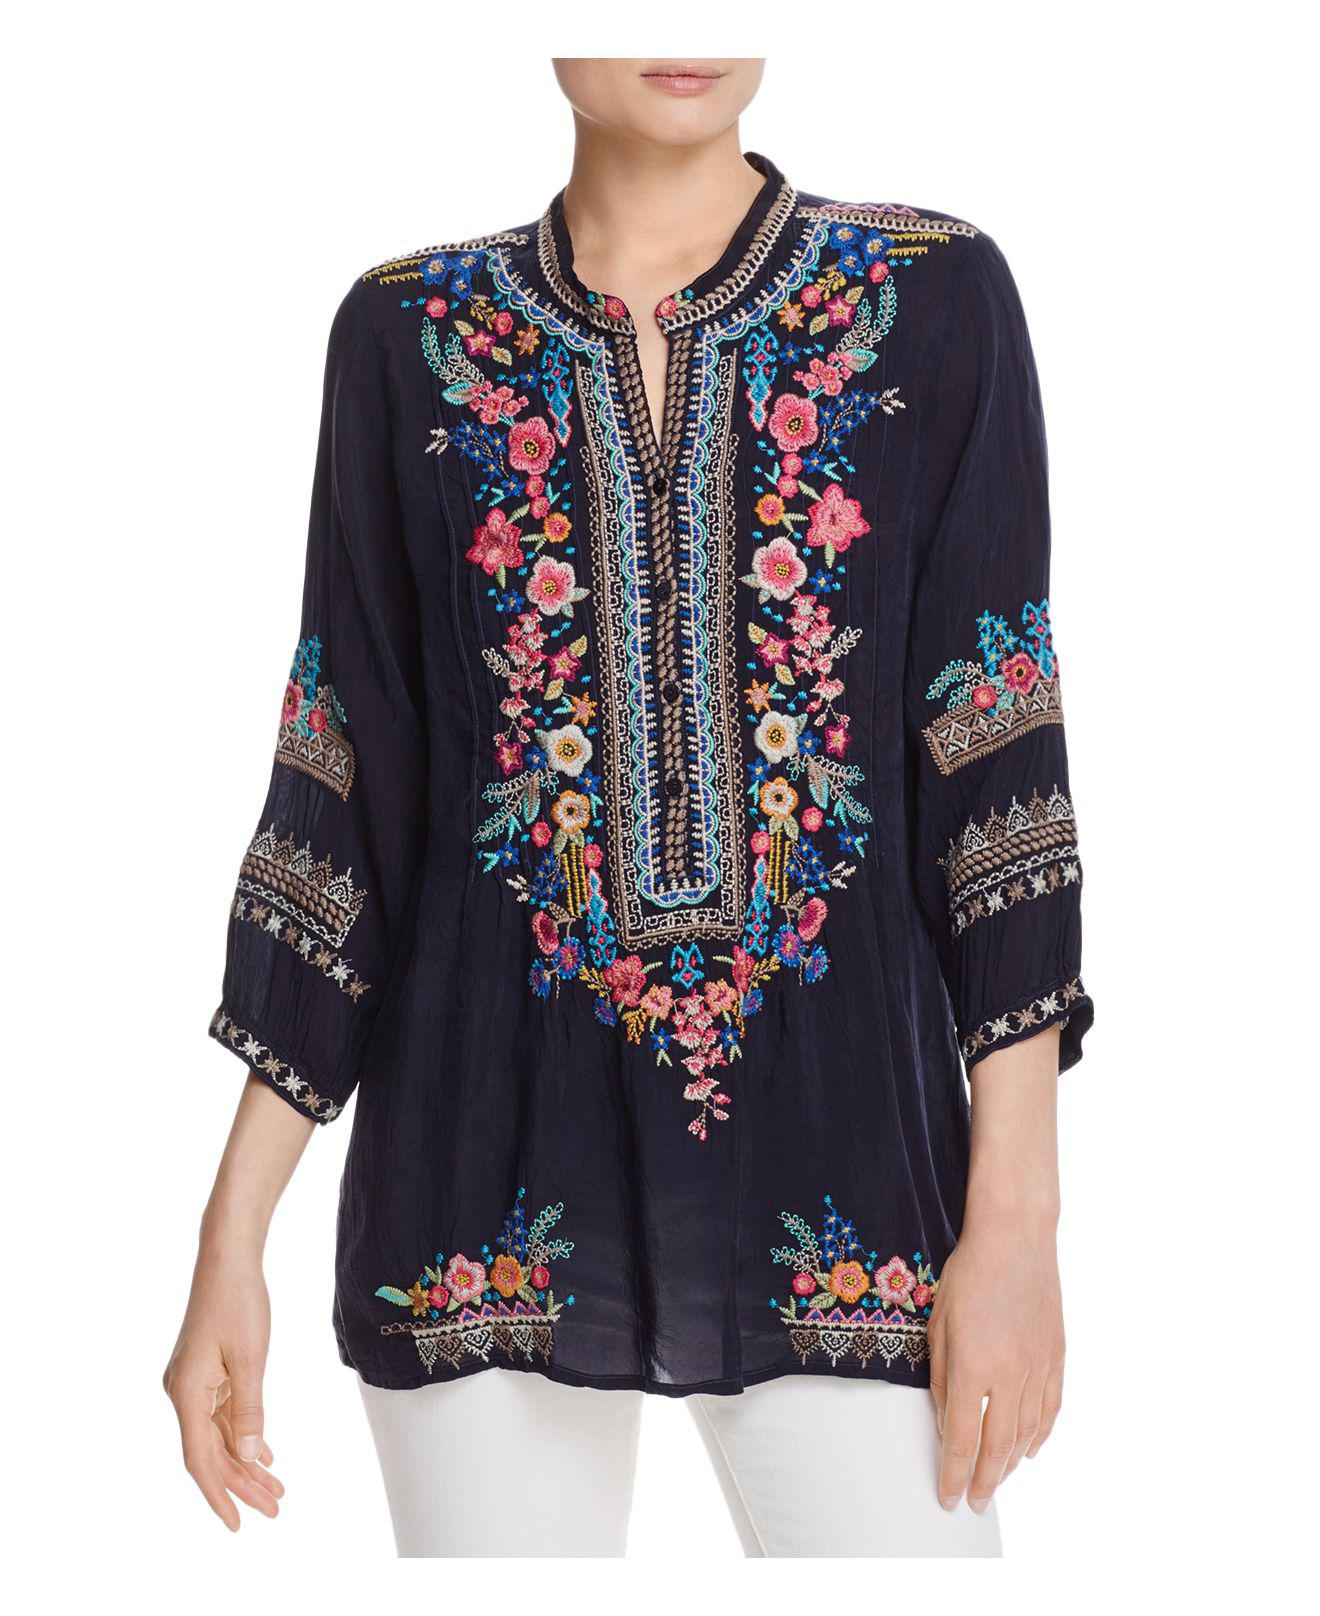 Lyst - Johnny Was Embroidered Peasant Tunic in Blue